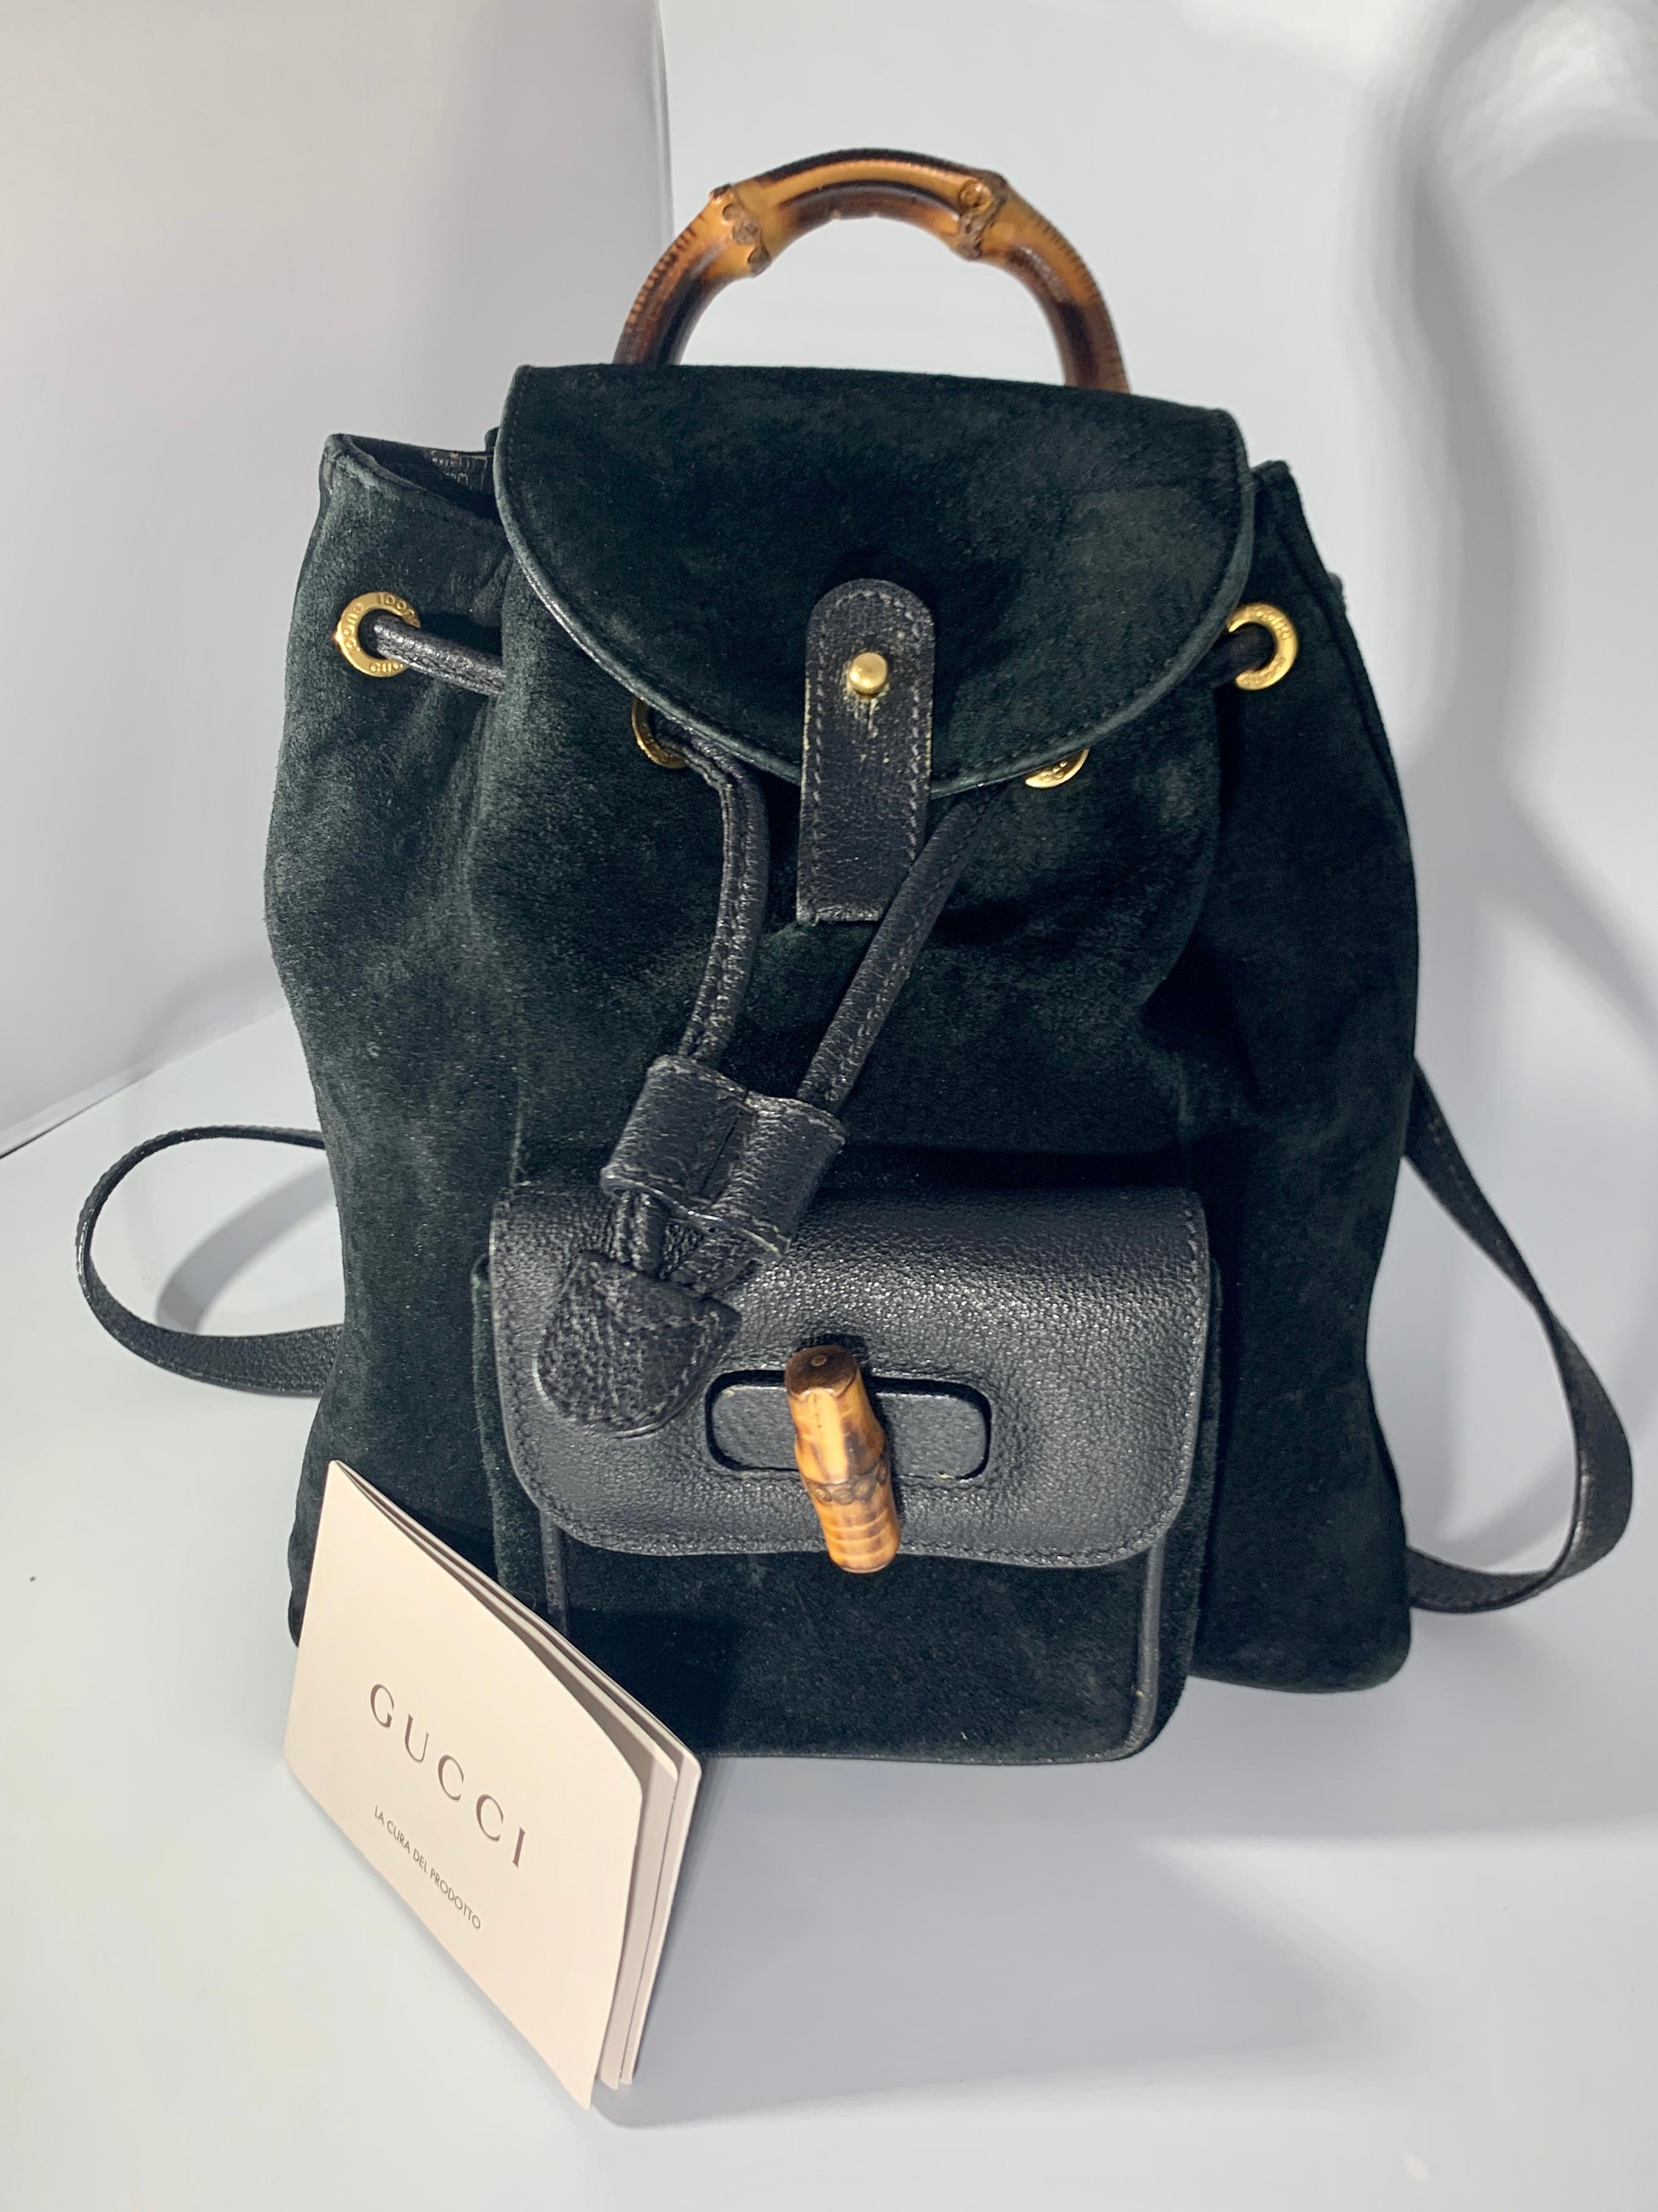 Gucci Vintage Black Suede/Leather Bamboo Mini Backpack With Drawstring ...